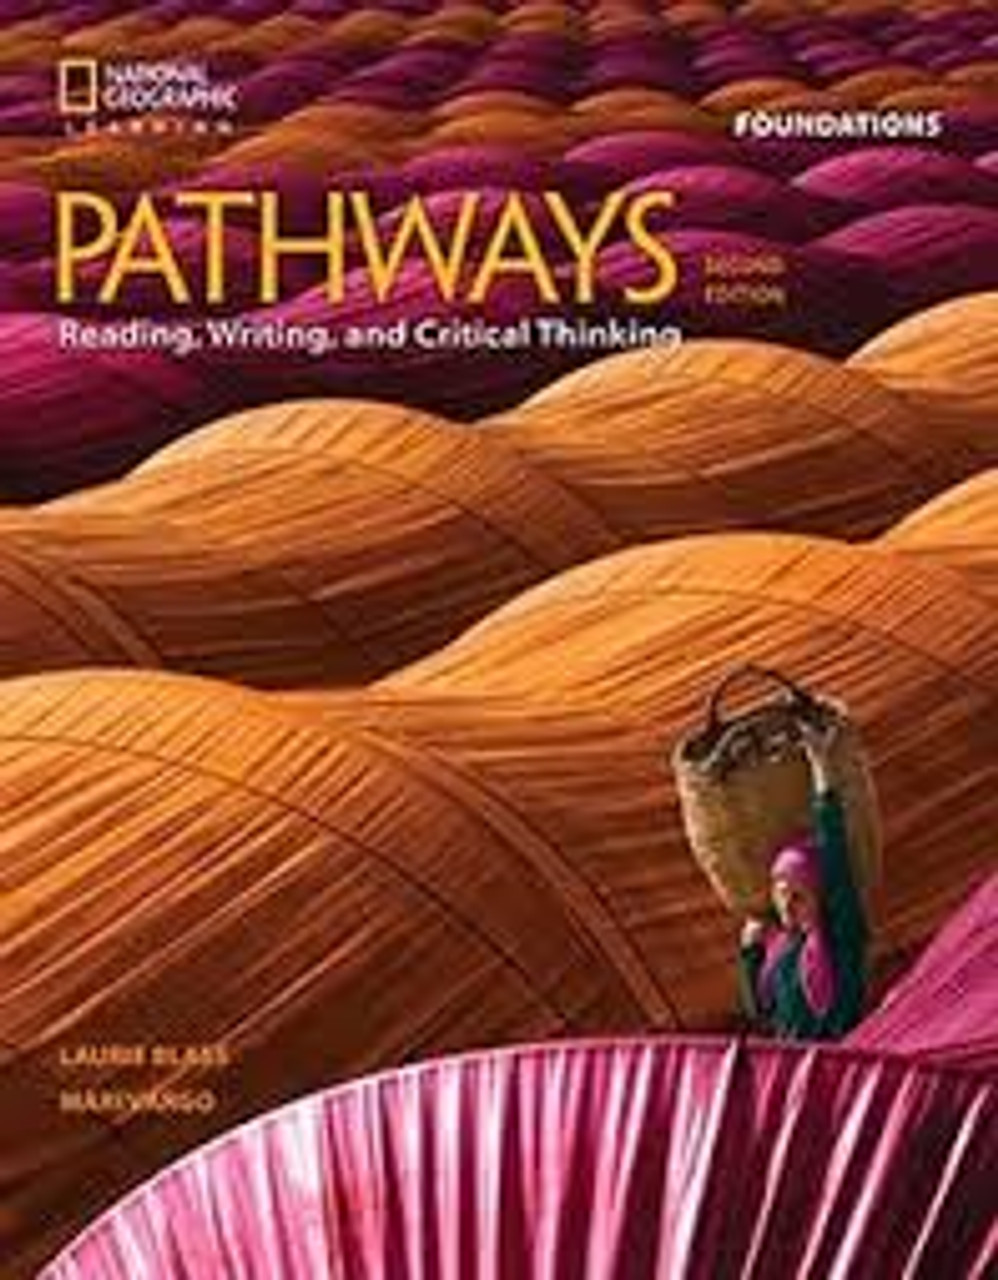 Critical　Pathways:　Writing　Thinking　Guide)　Eton　and　Press　Reading,　Foundations　(Teacher's